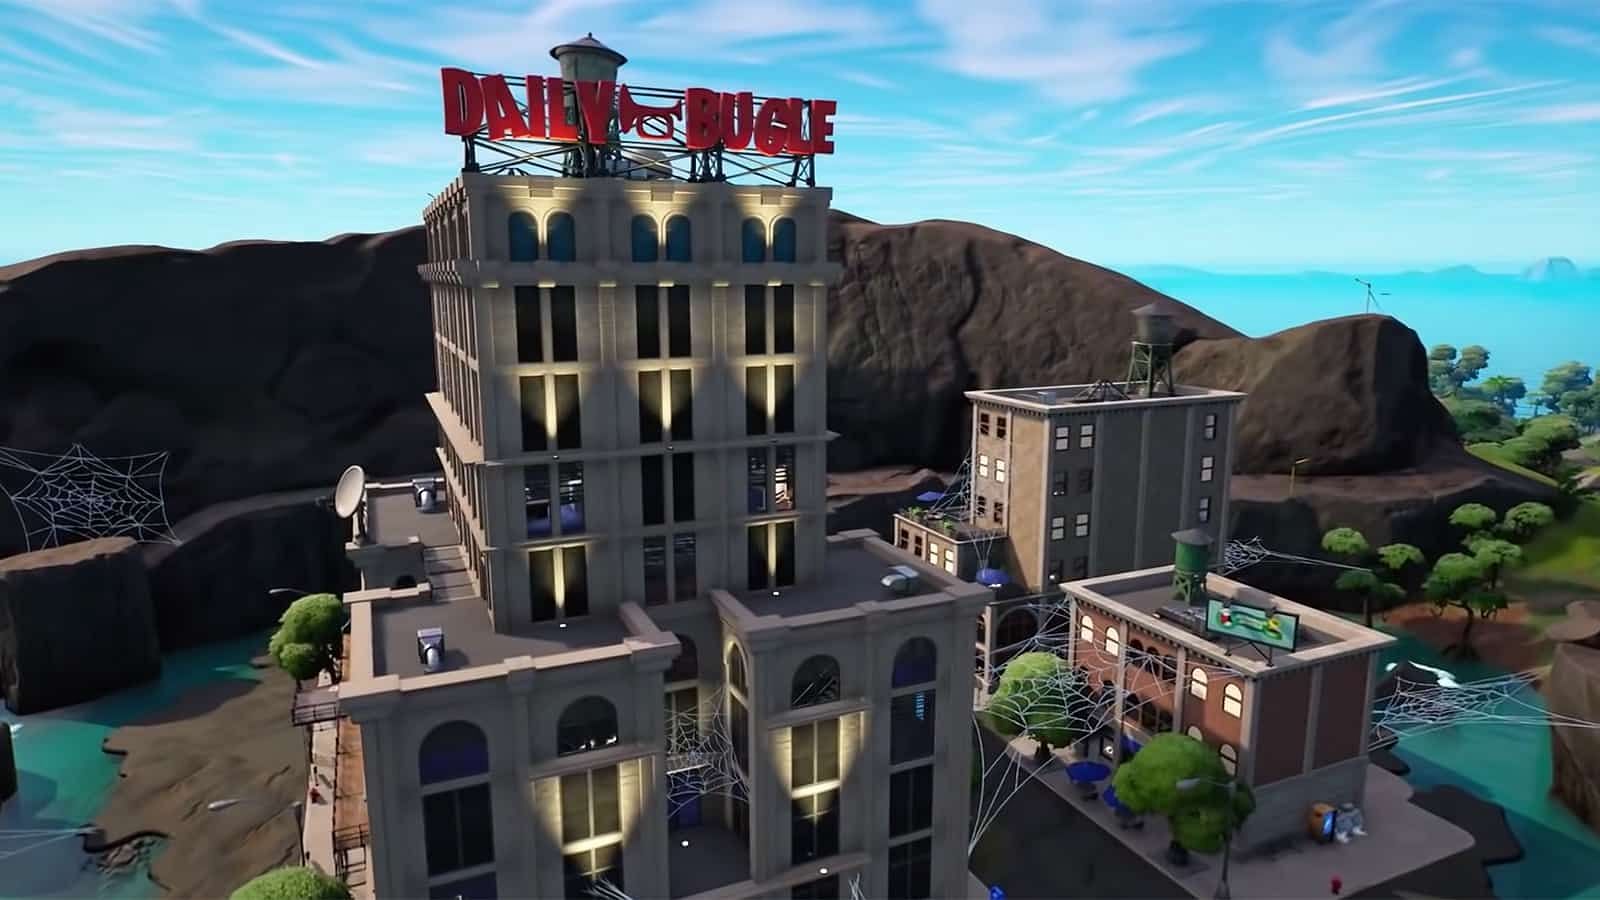 The Daily Bugle has been taken over (Image via Epic Games)